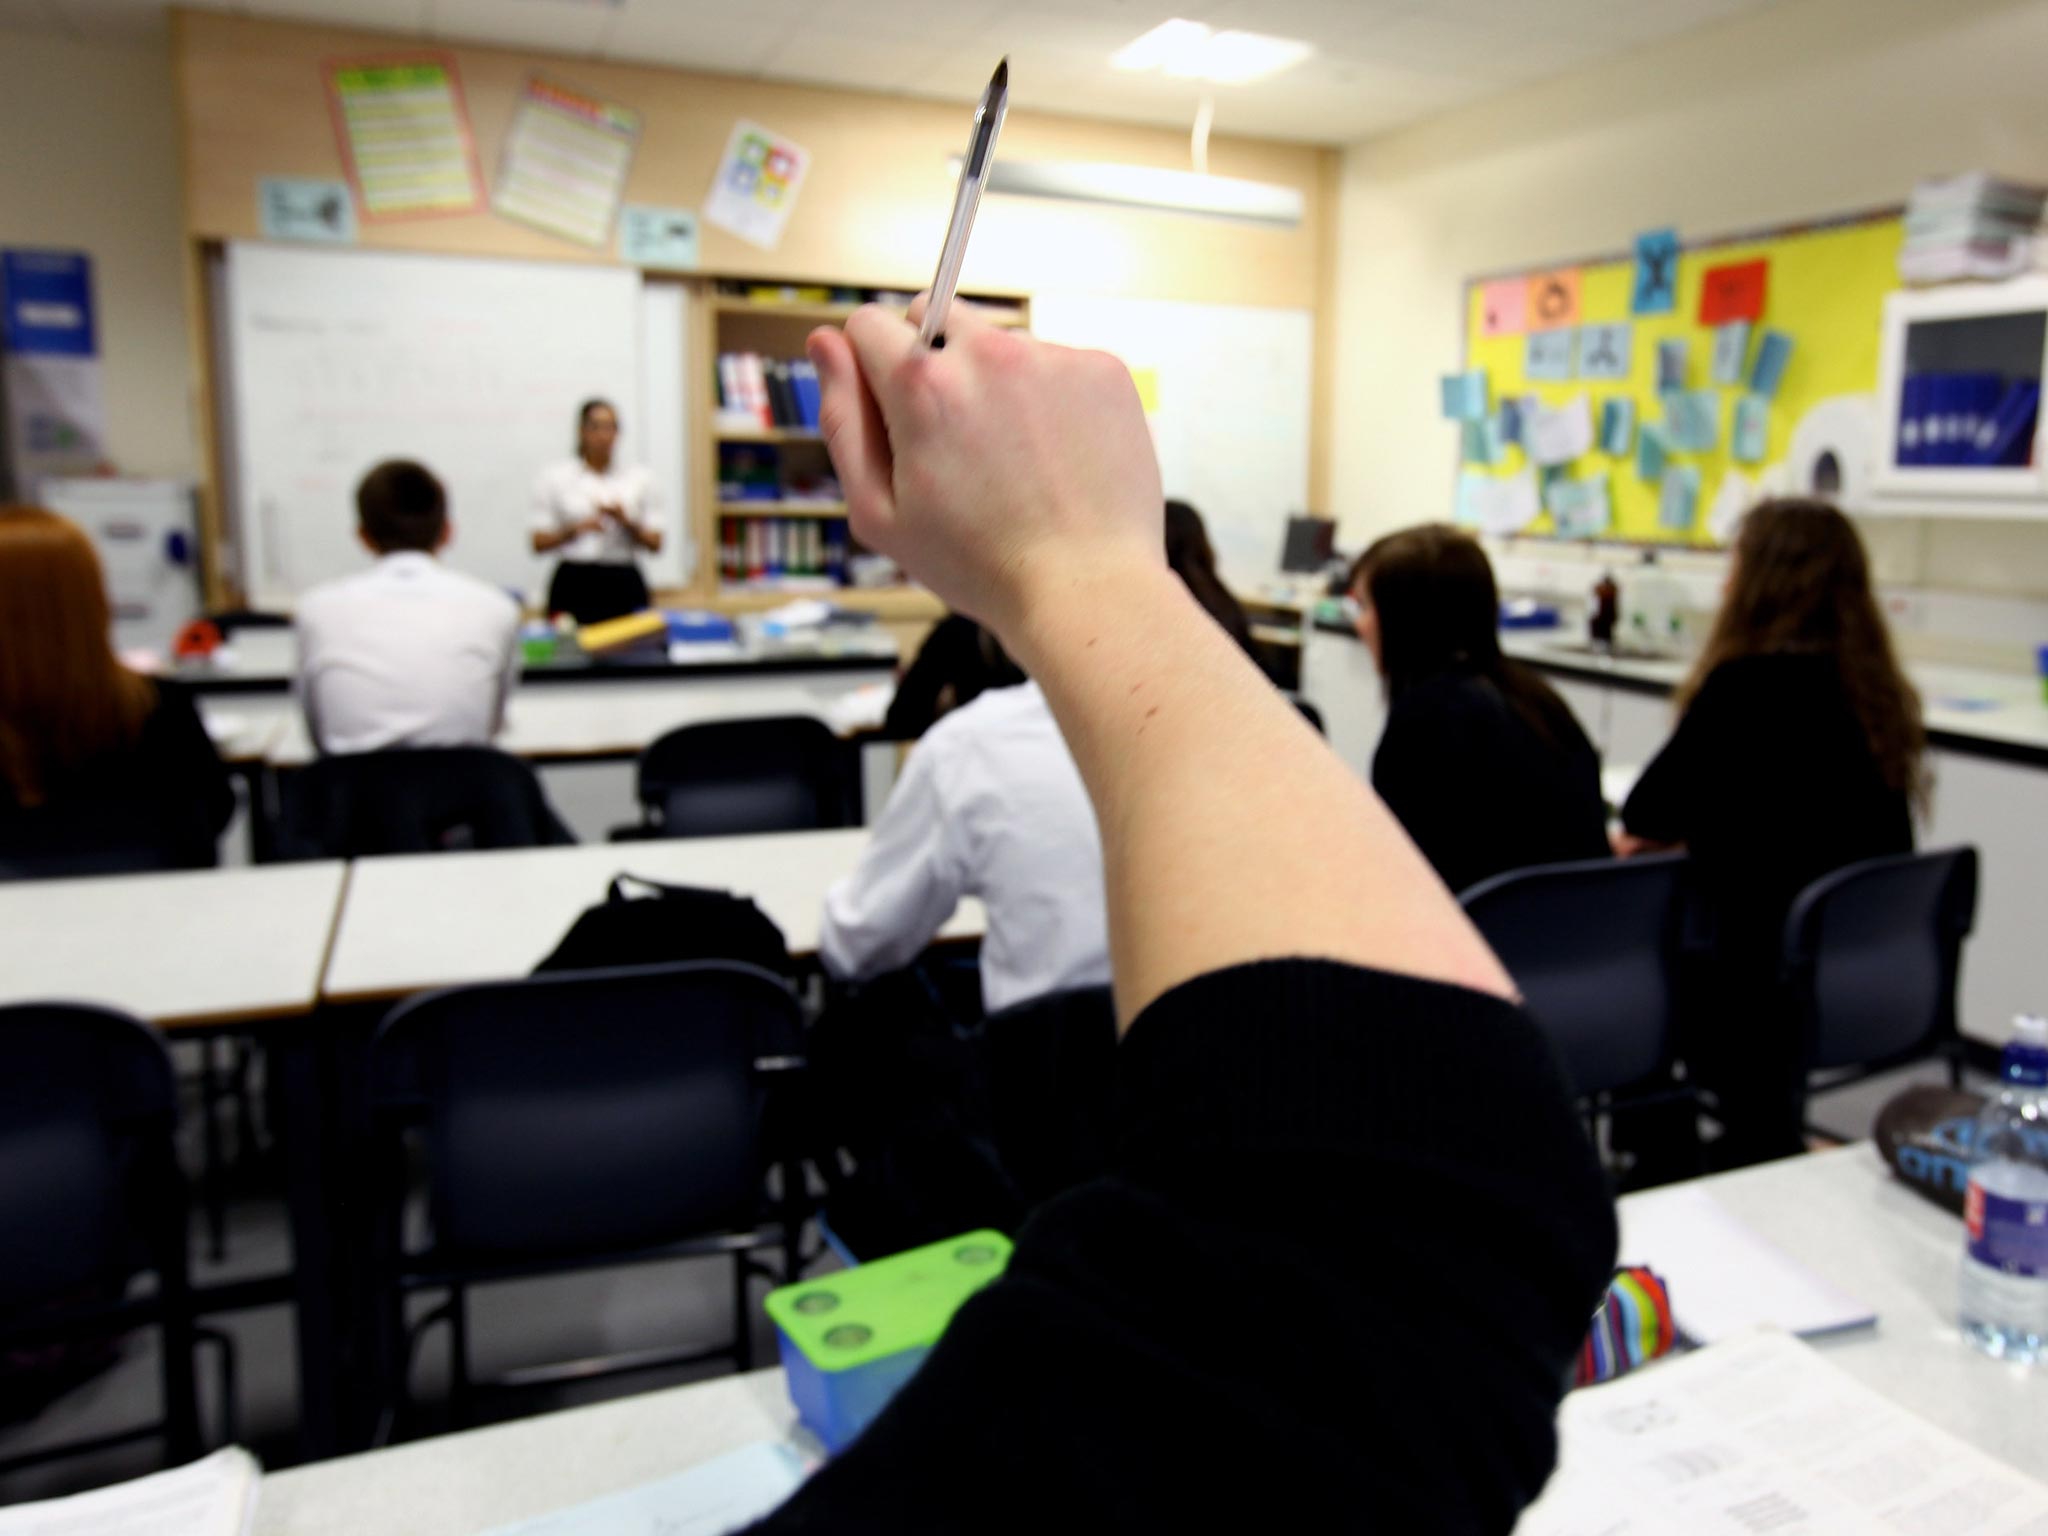 A trial of the scheme led to fewer pupils from the schools who took part in the plan being sent home